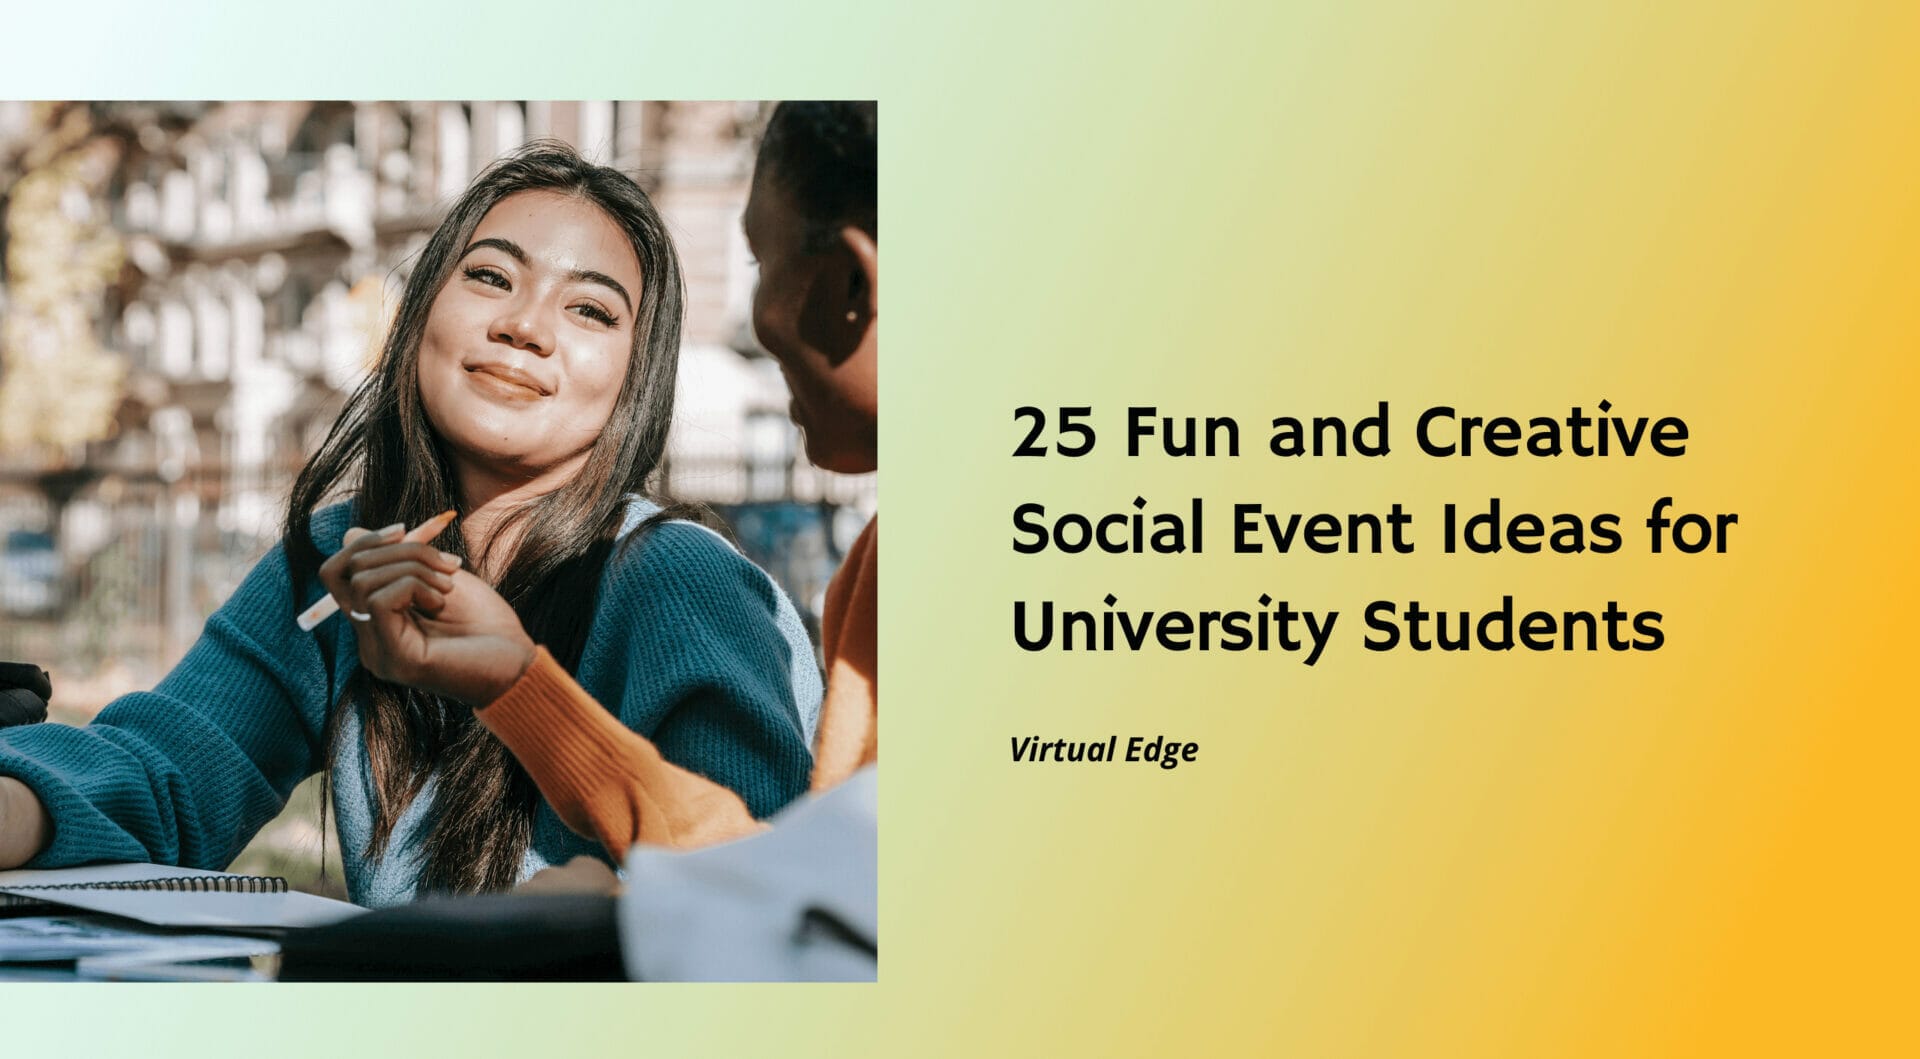 25 Fun and Creative Social Event Ideas for University Students